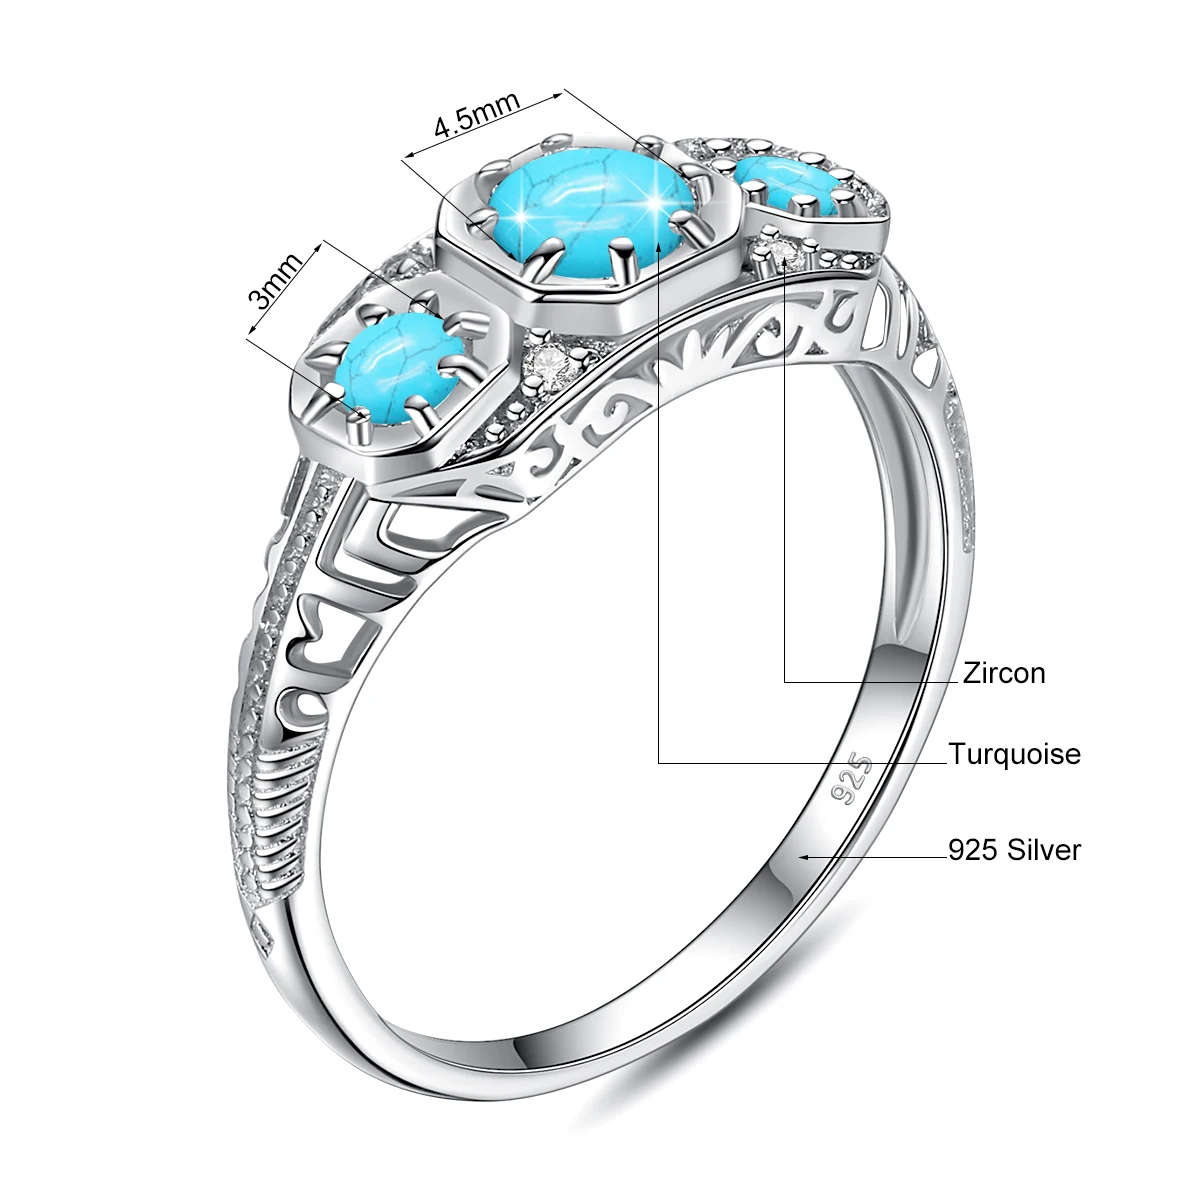 Silver 925 Real 3 Stone Turquoise Rings For Women Wedding Party Anniversary Gift - $56.24